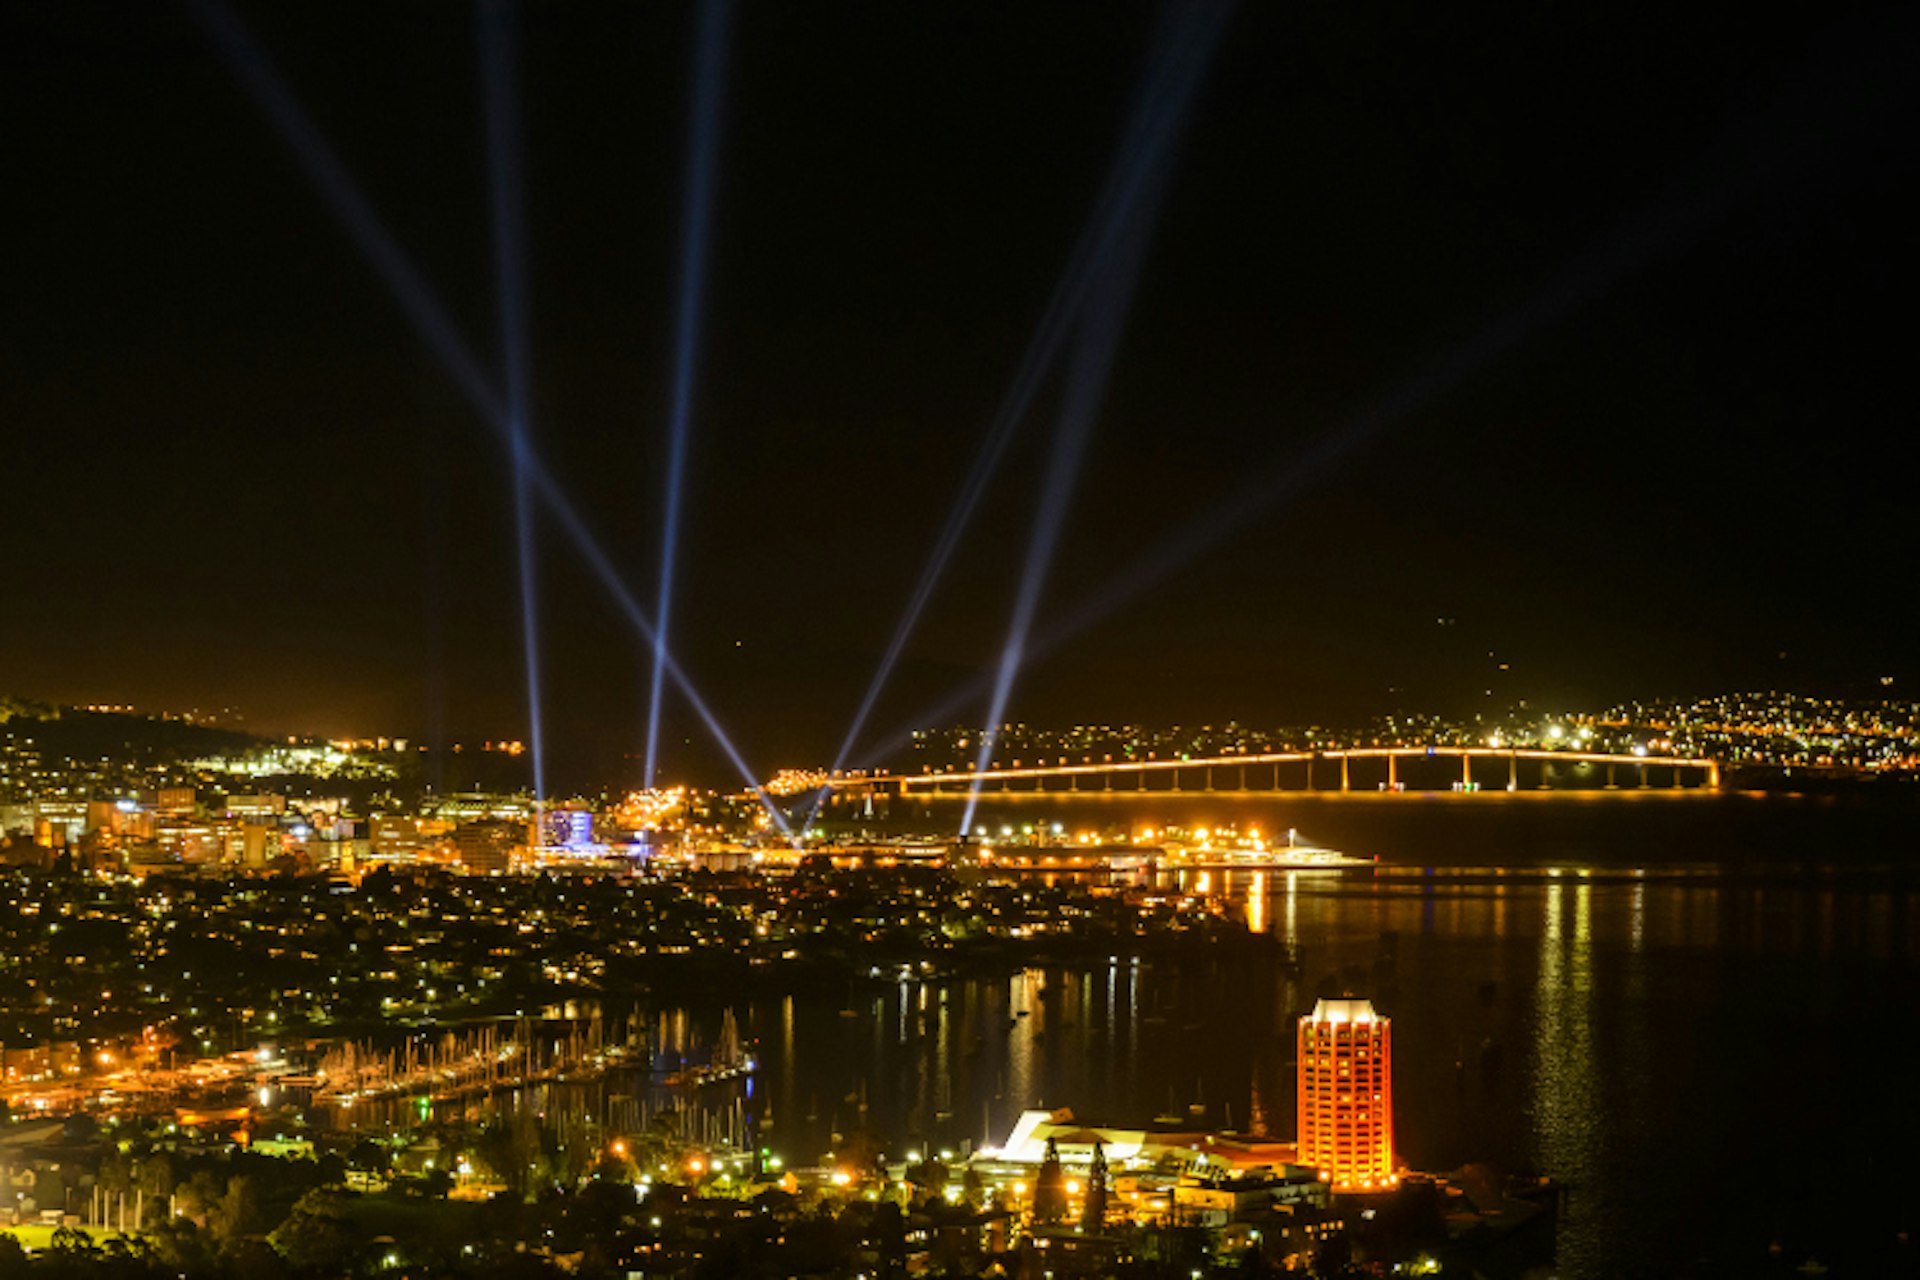 Dark Mofo festival sees the night sky lit up in Hobart / Image by Grant Dixon / Getty Images 